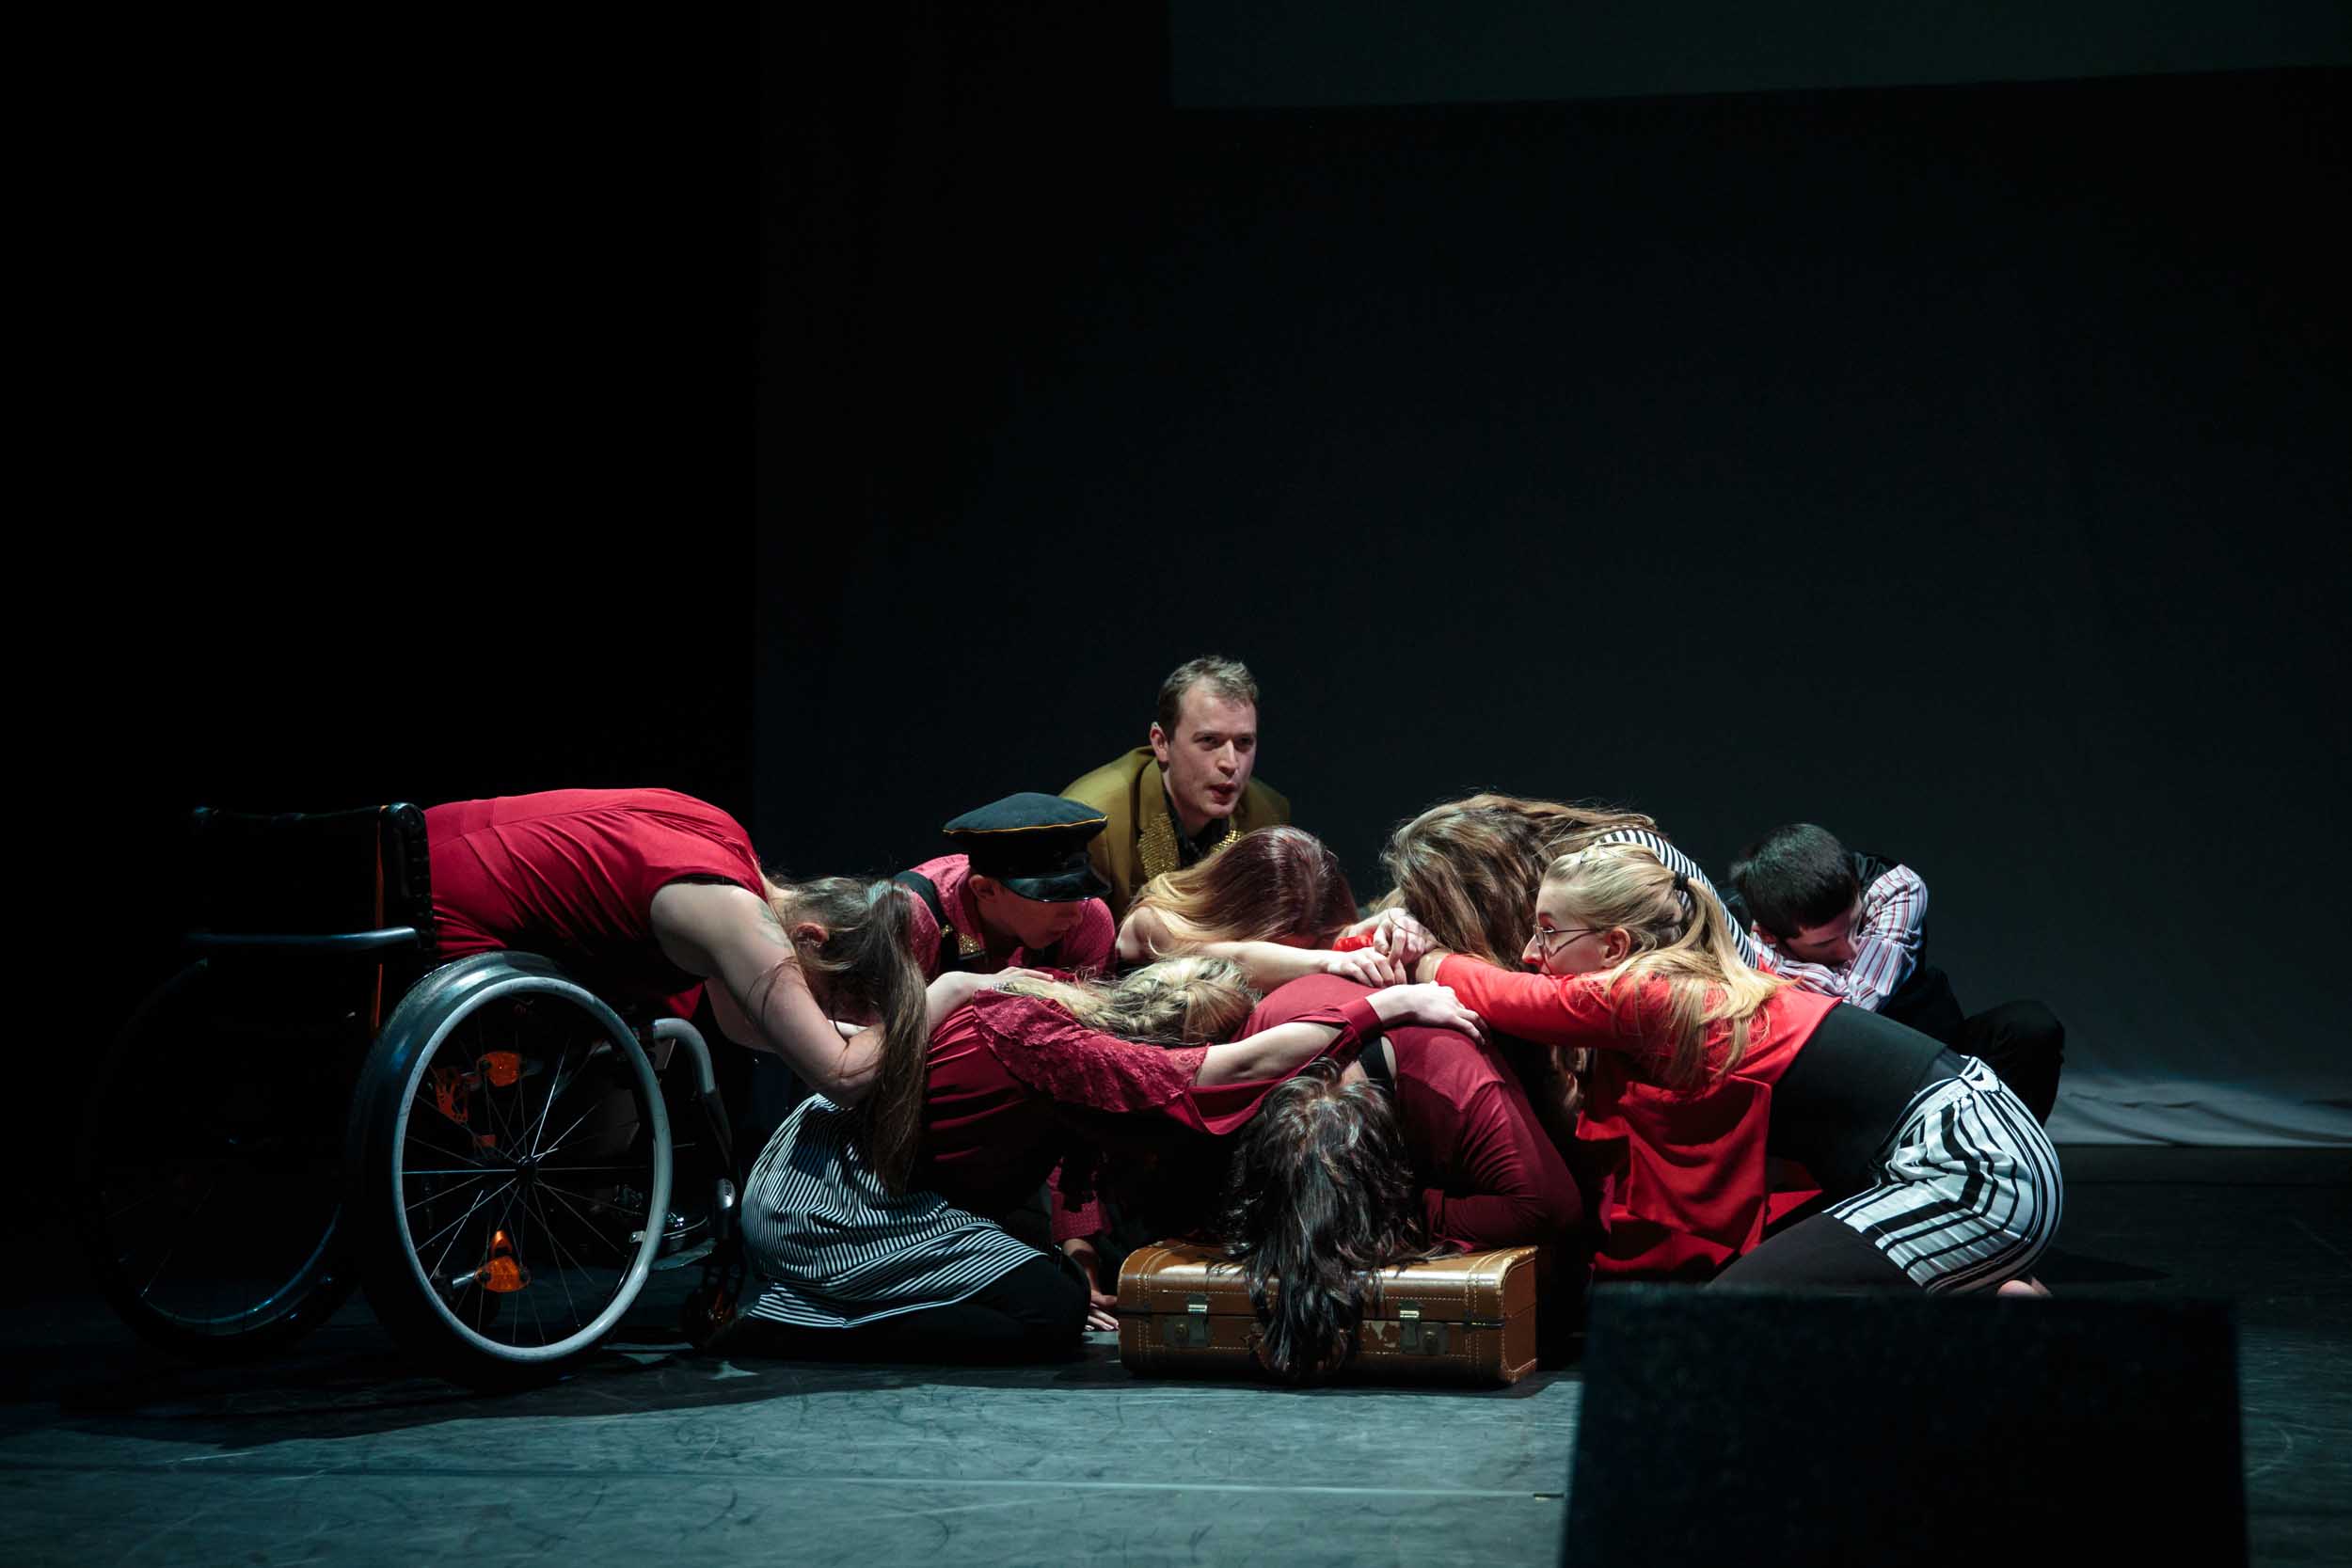 A group of young disabled and non-disabled people grouped together in the centre of a dimly lit stage. They are all sitting or bending their bodies towards the ground, holding onto each other.